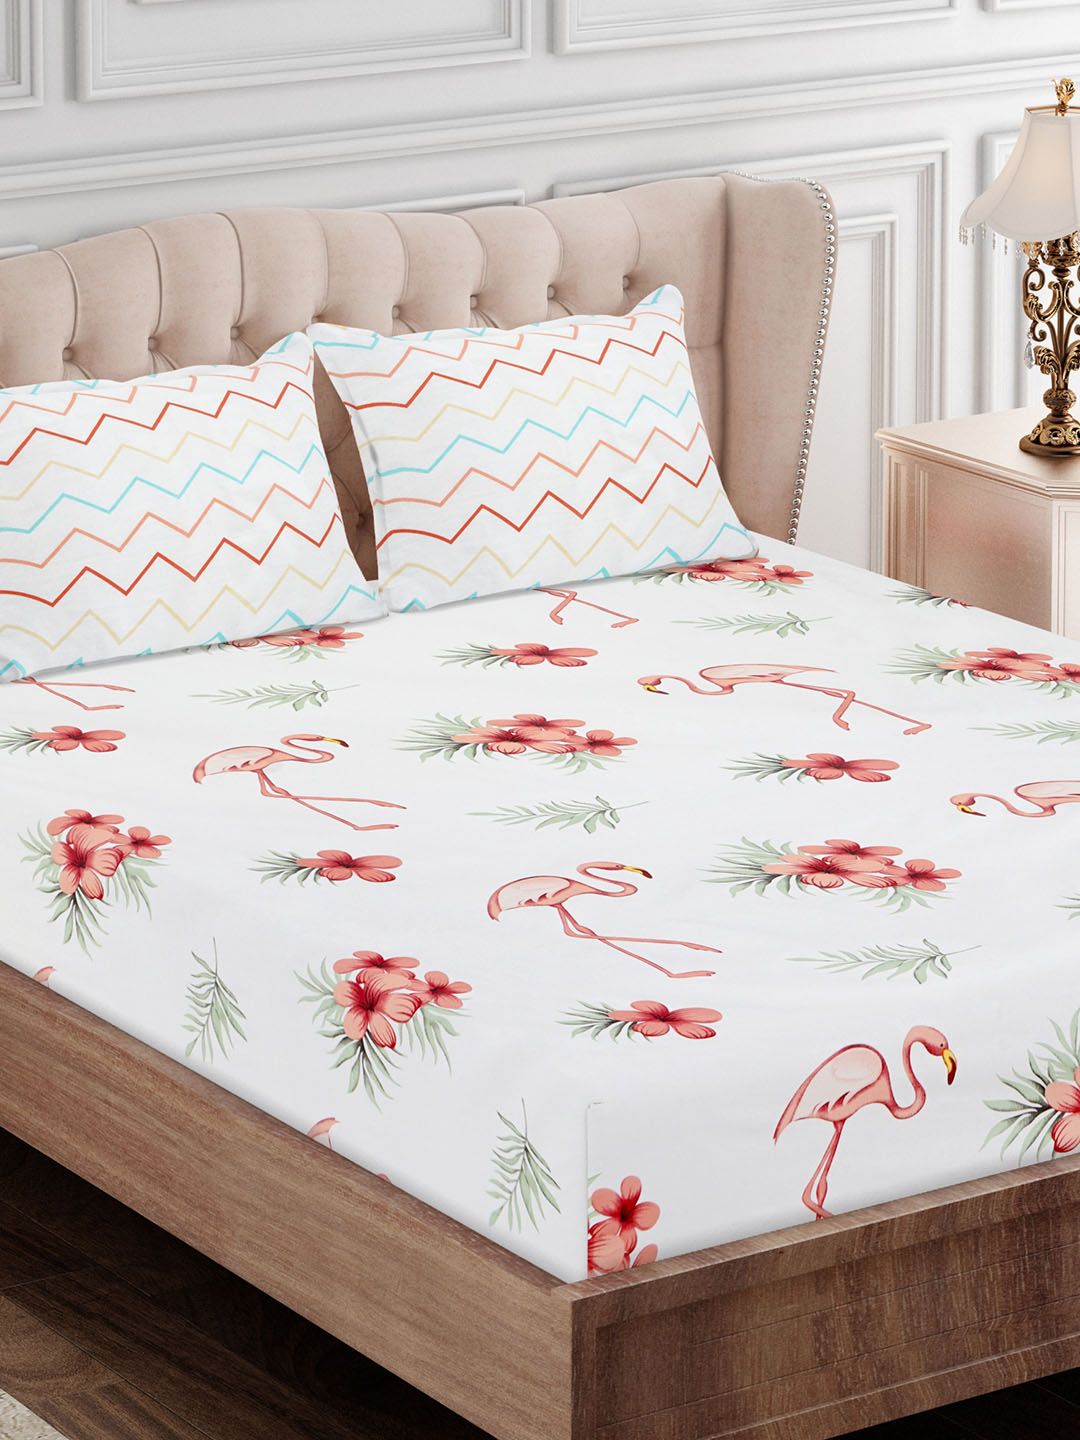 SEJ by Nisha Gupta Brown & Off White Floral 180 TC King Bedsheet with 2 Pillow Covers Price in India